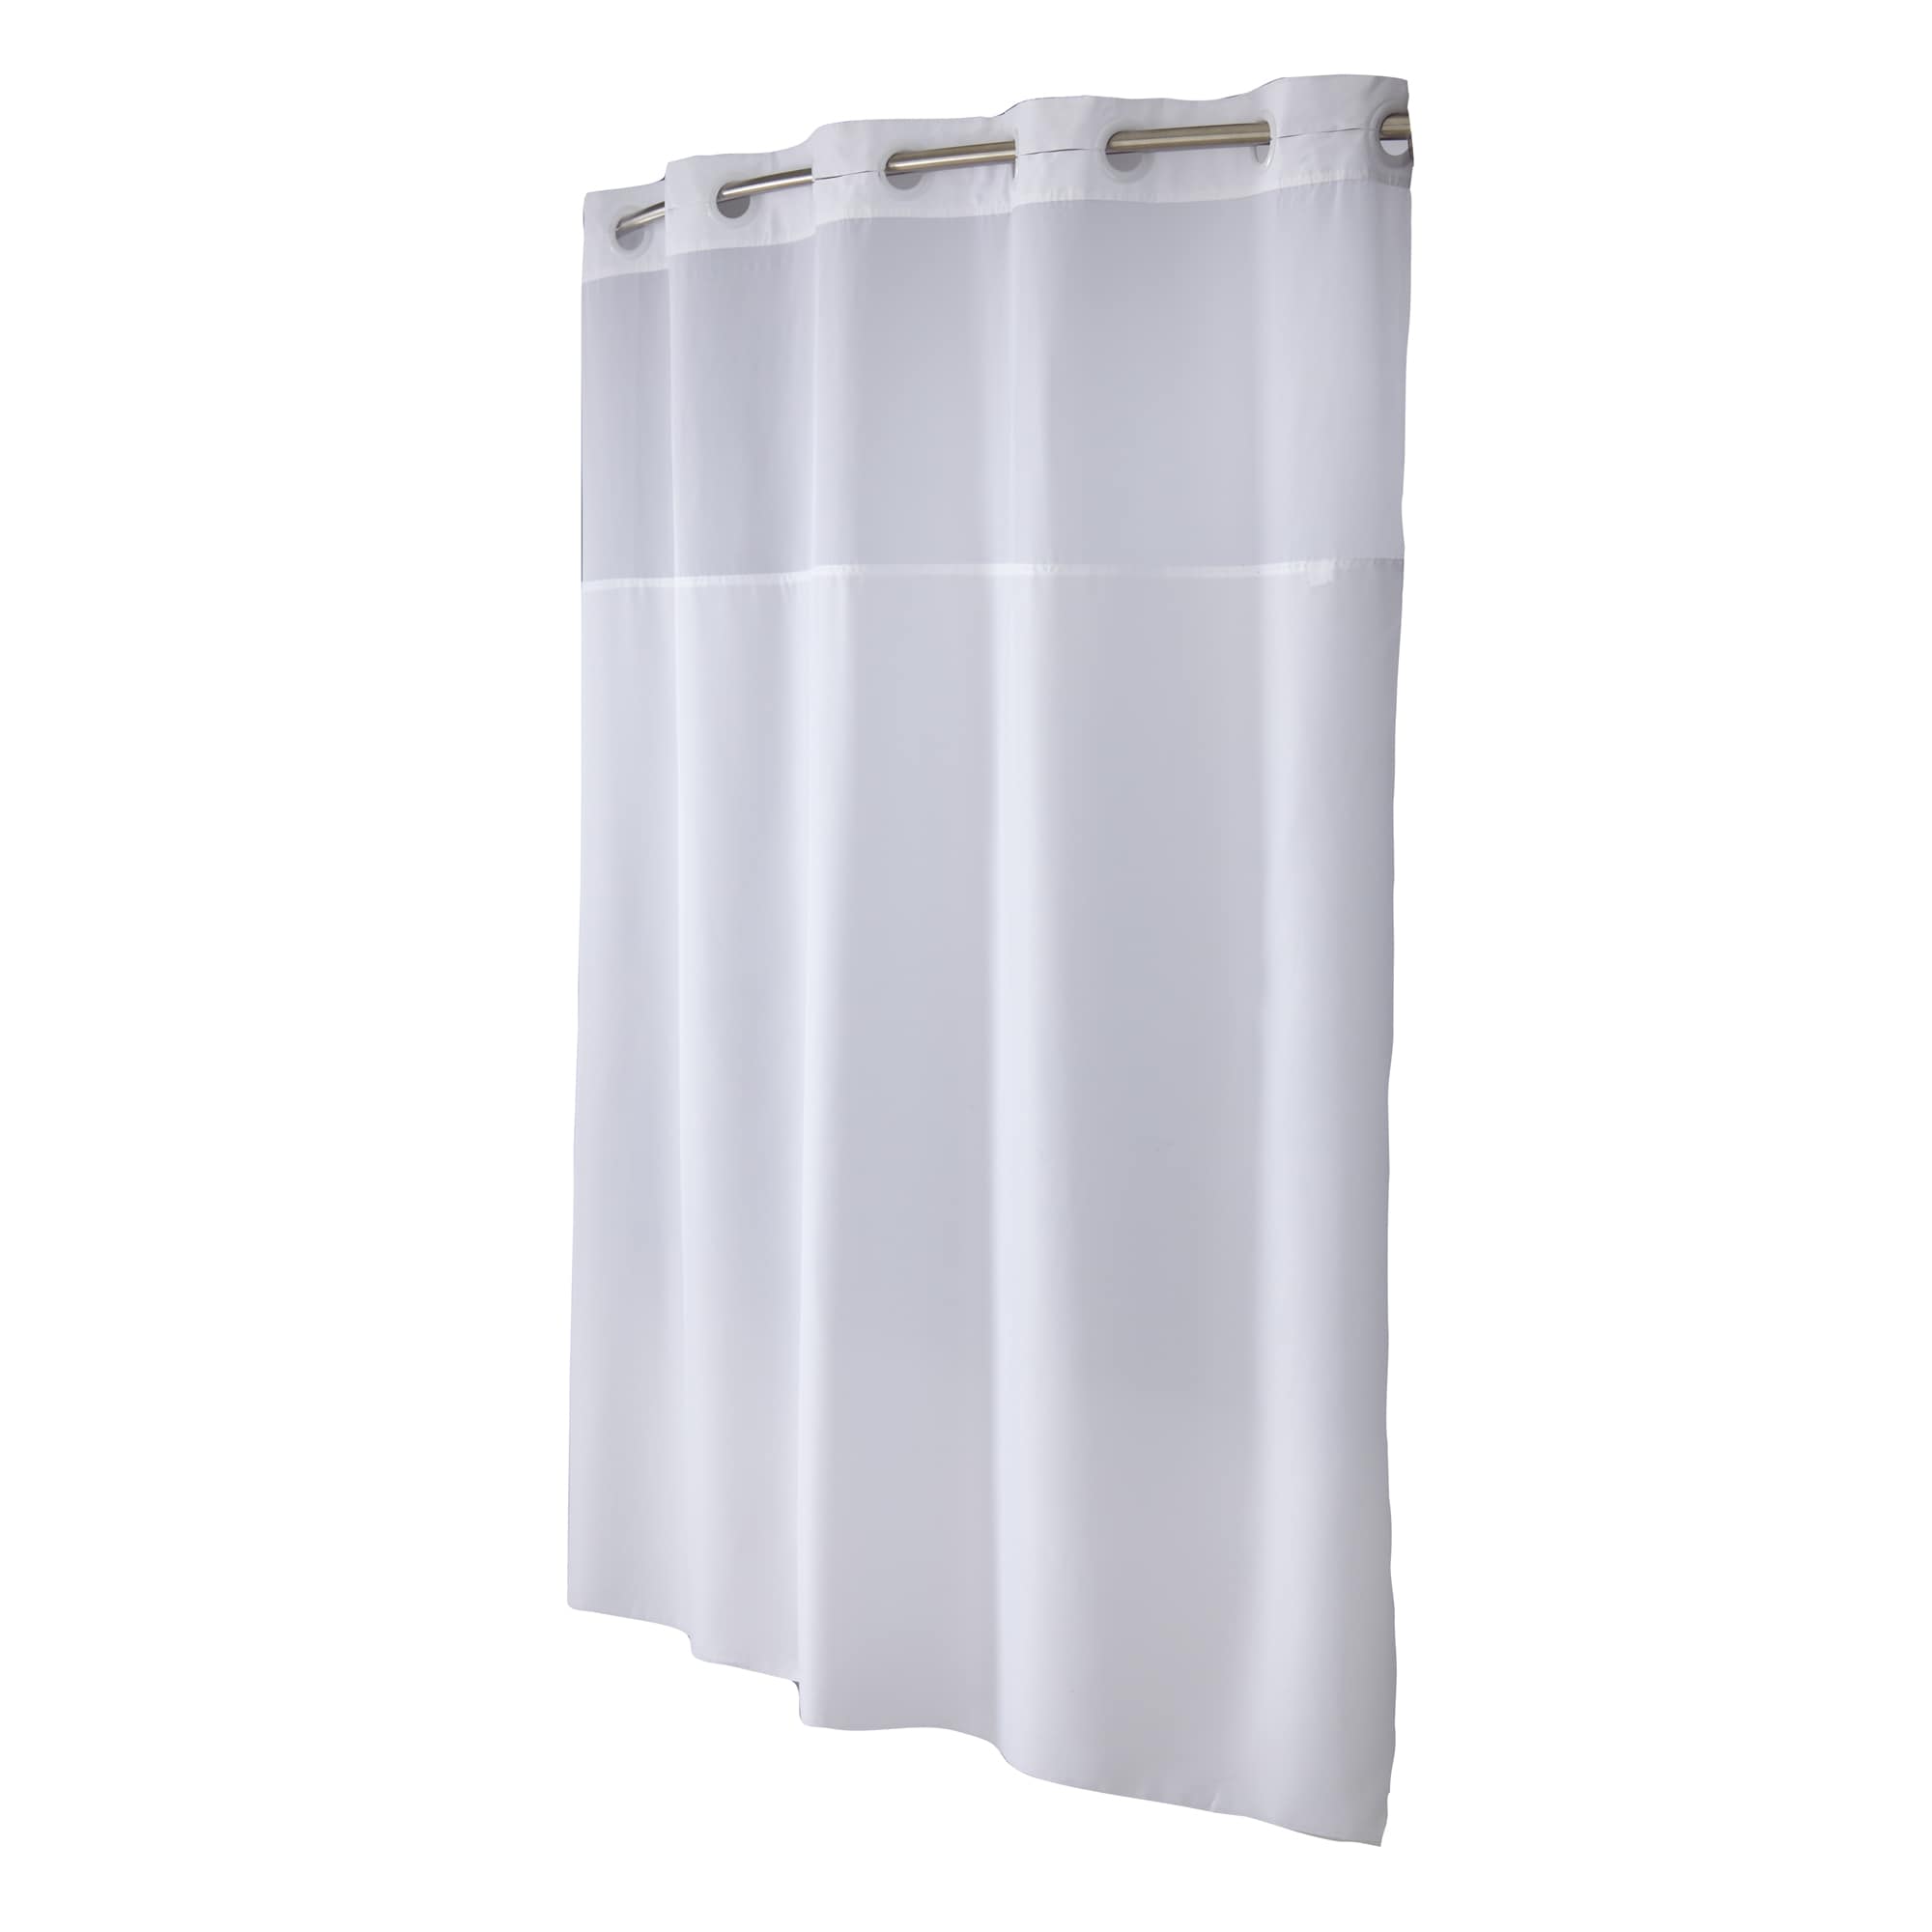 Hookless Waves Sheer Polyester Shower Curtain with 12" Sheer Voile Window 71... 